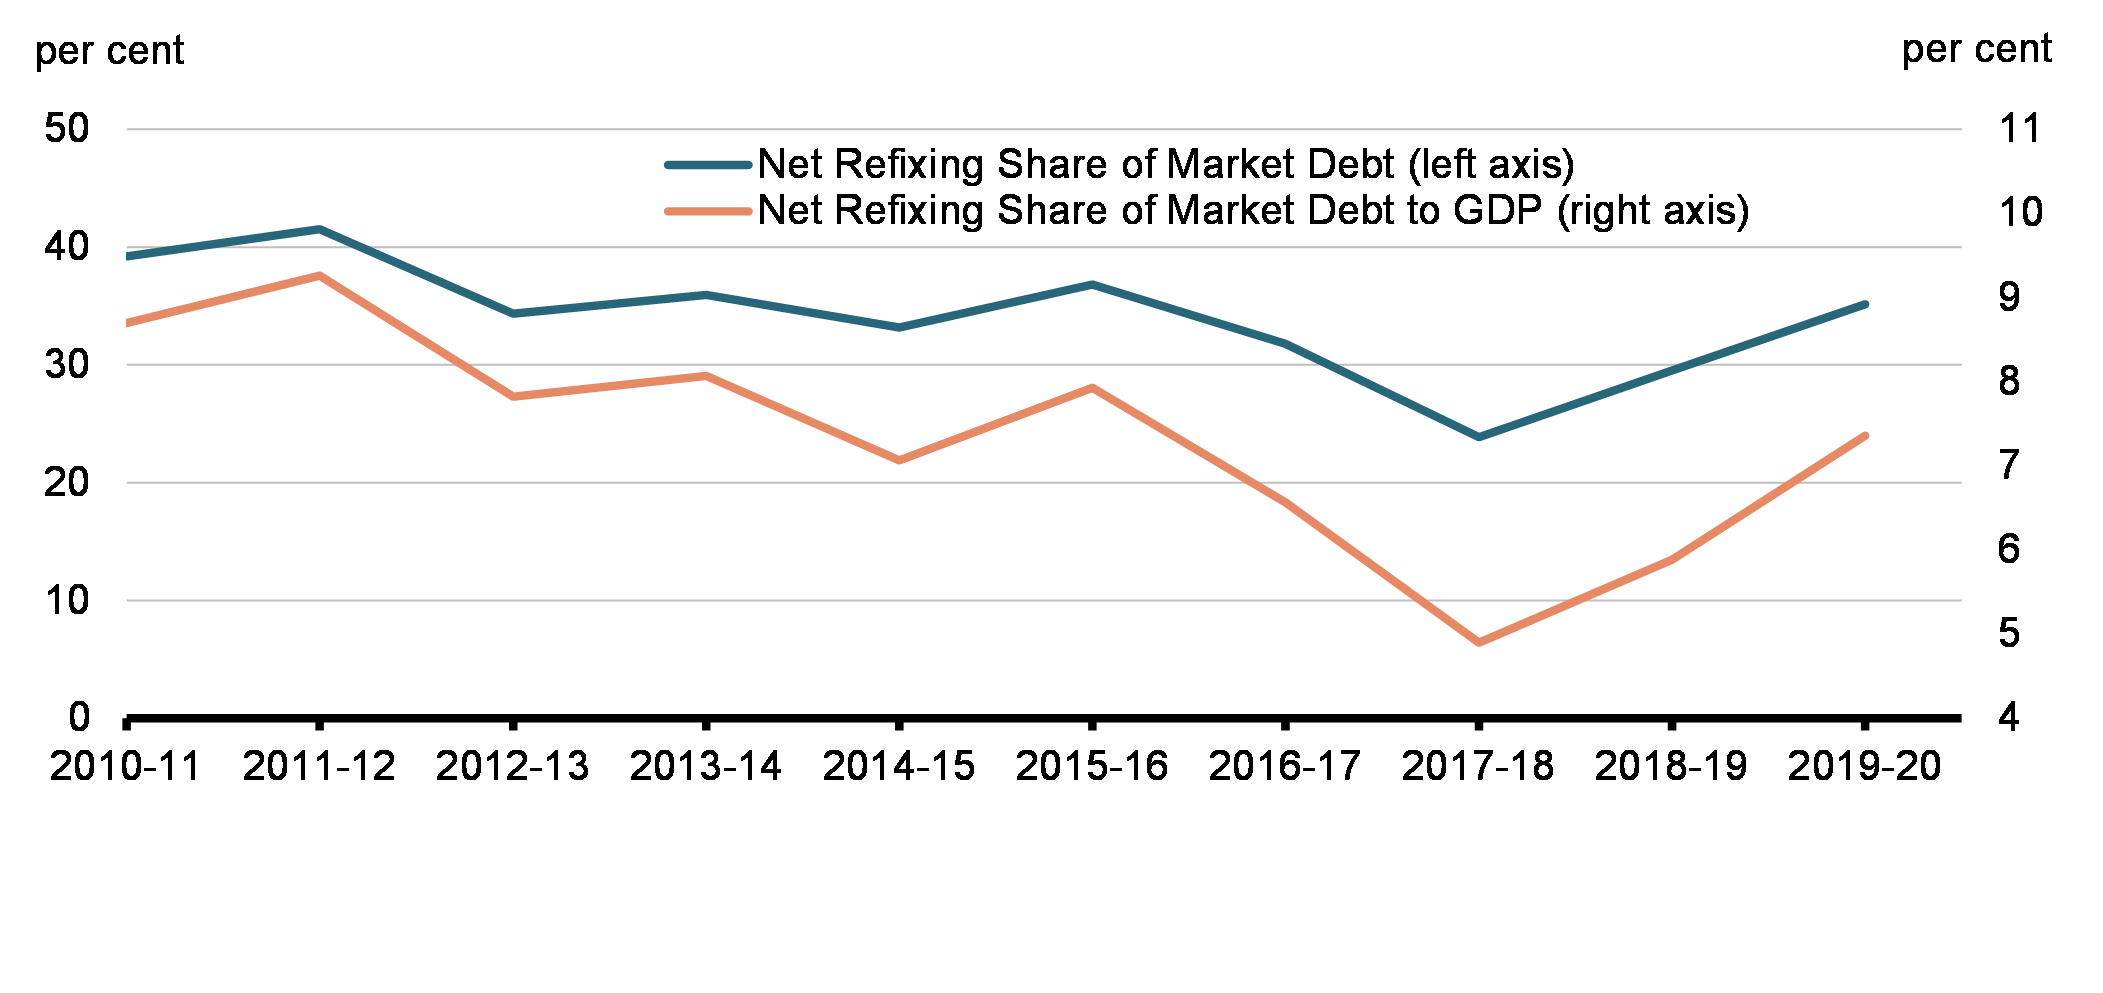 Chart 7 - Net Refixing Share of Market Debt and Market Debt to GDP